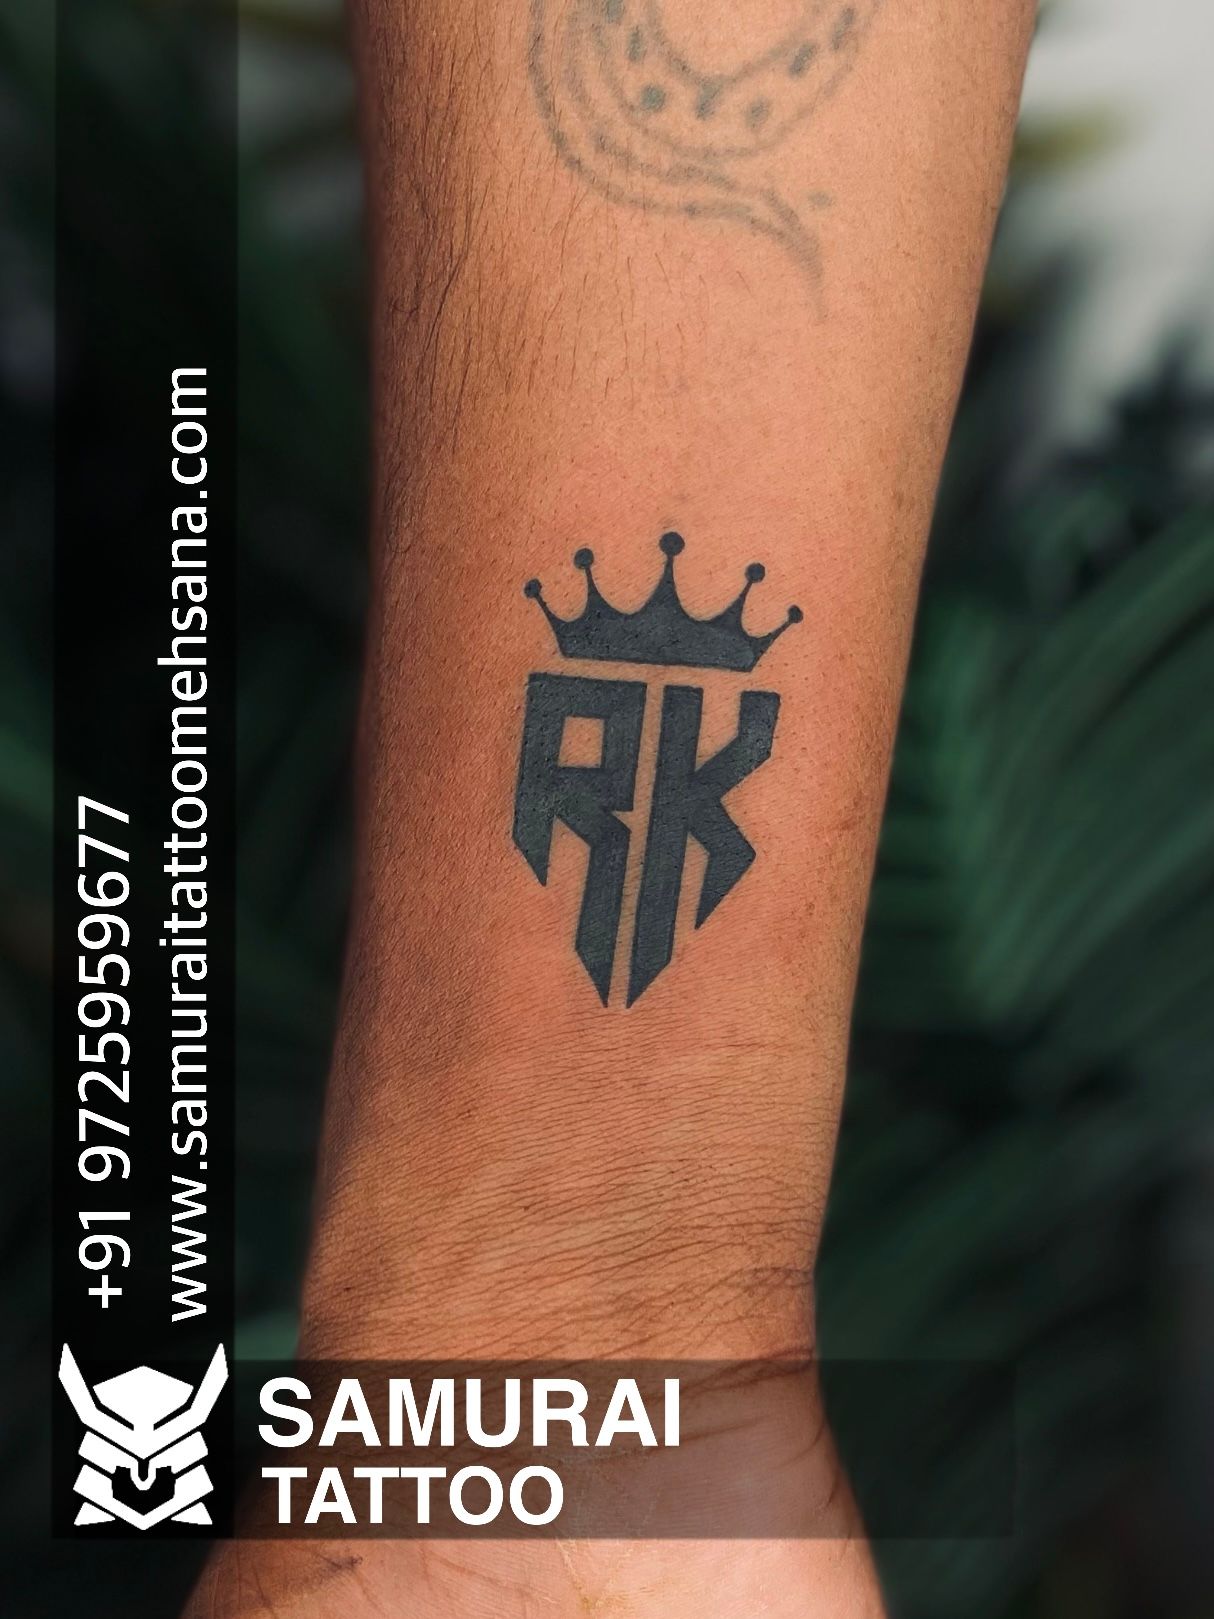 Bob Tattoo Studio -RK Tattoo Designs Are you looking for best tattoo  studio/shops in Bangalore? Or Excited to get inked from the best t... |  Instagram